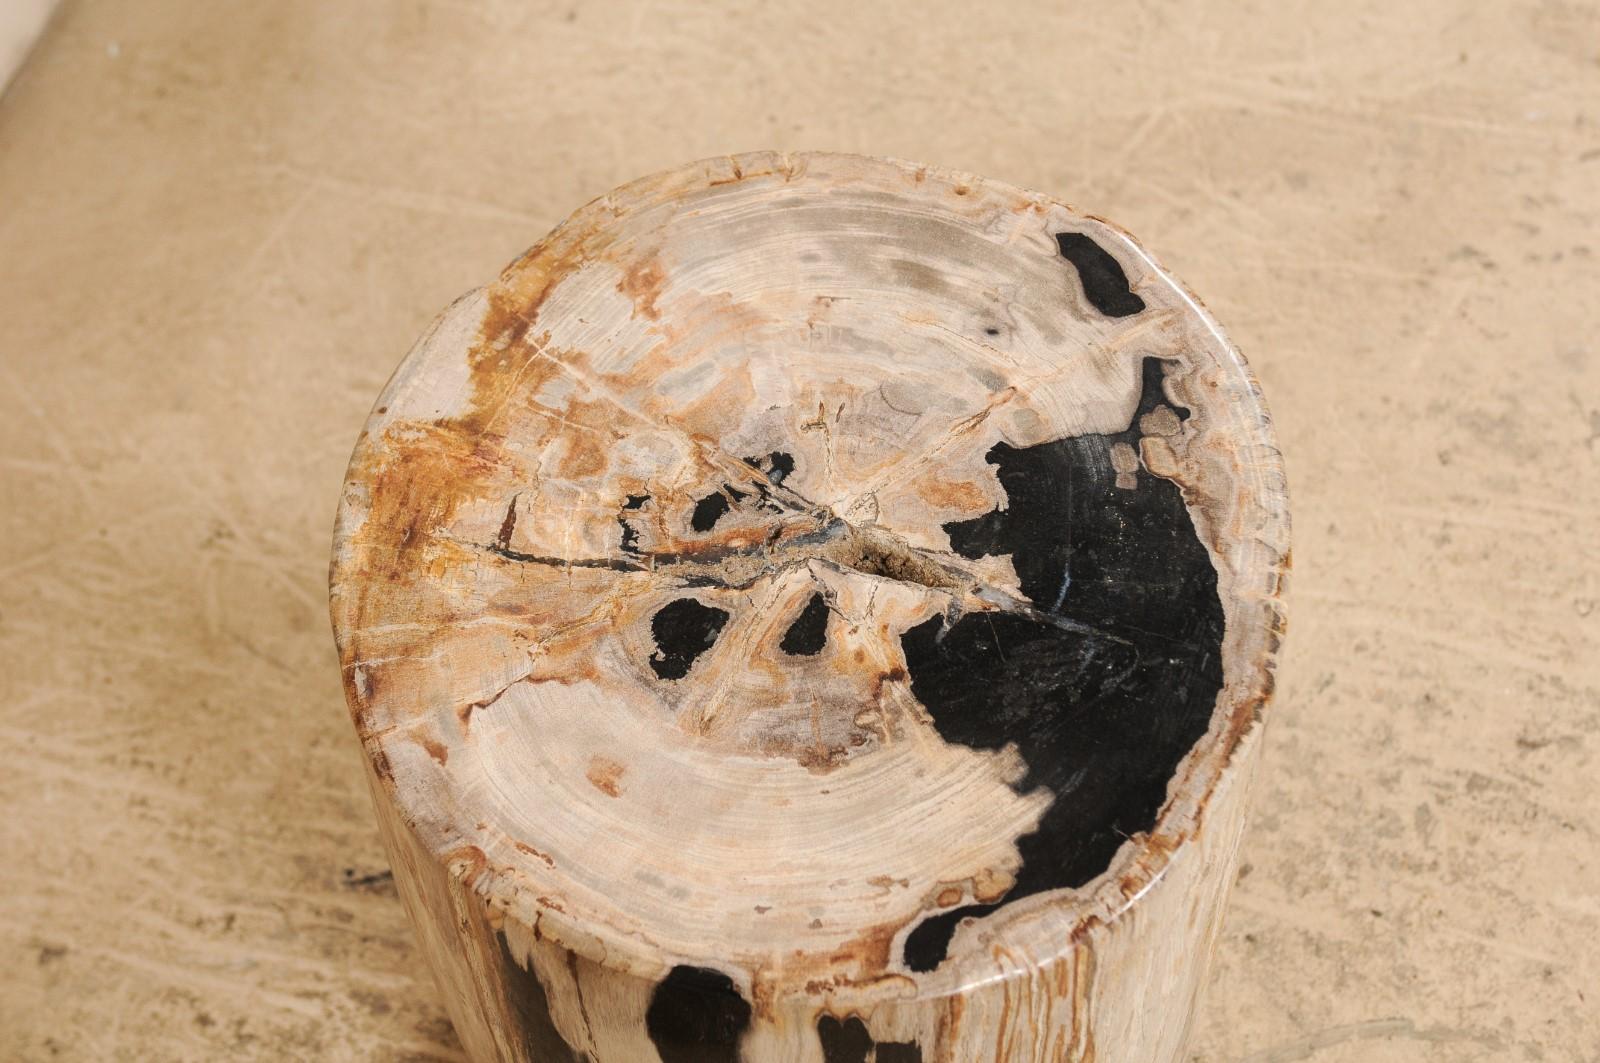 Pair of Petrified Wood Side Tables or Stools in Beautiful Cream and Black Colors 3